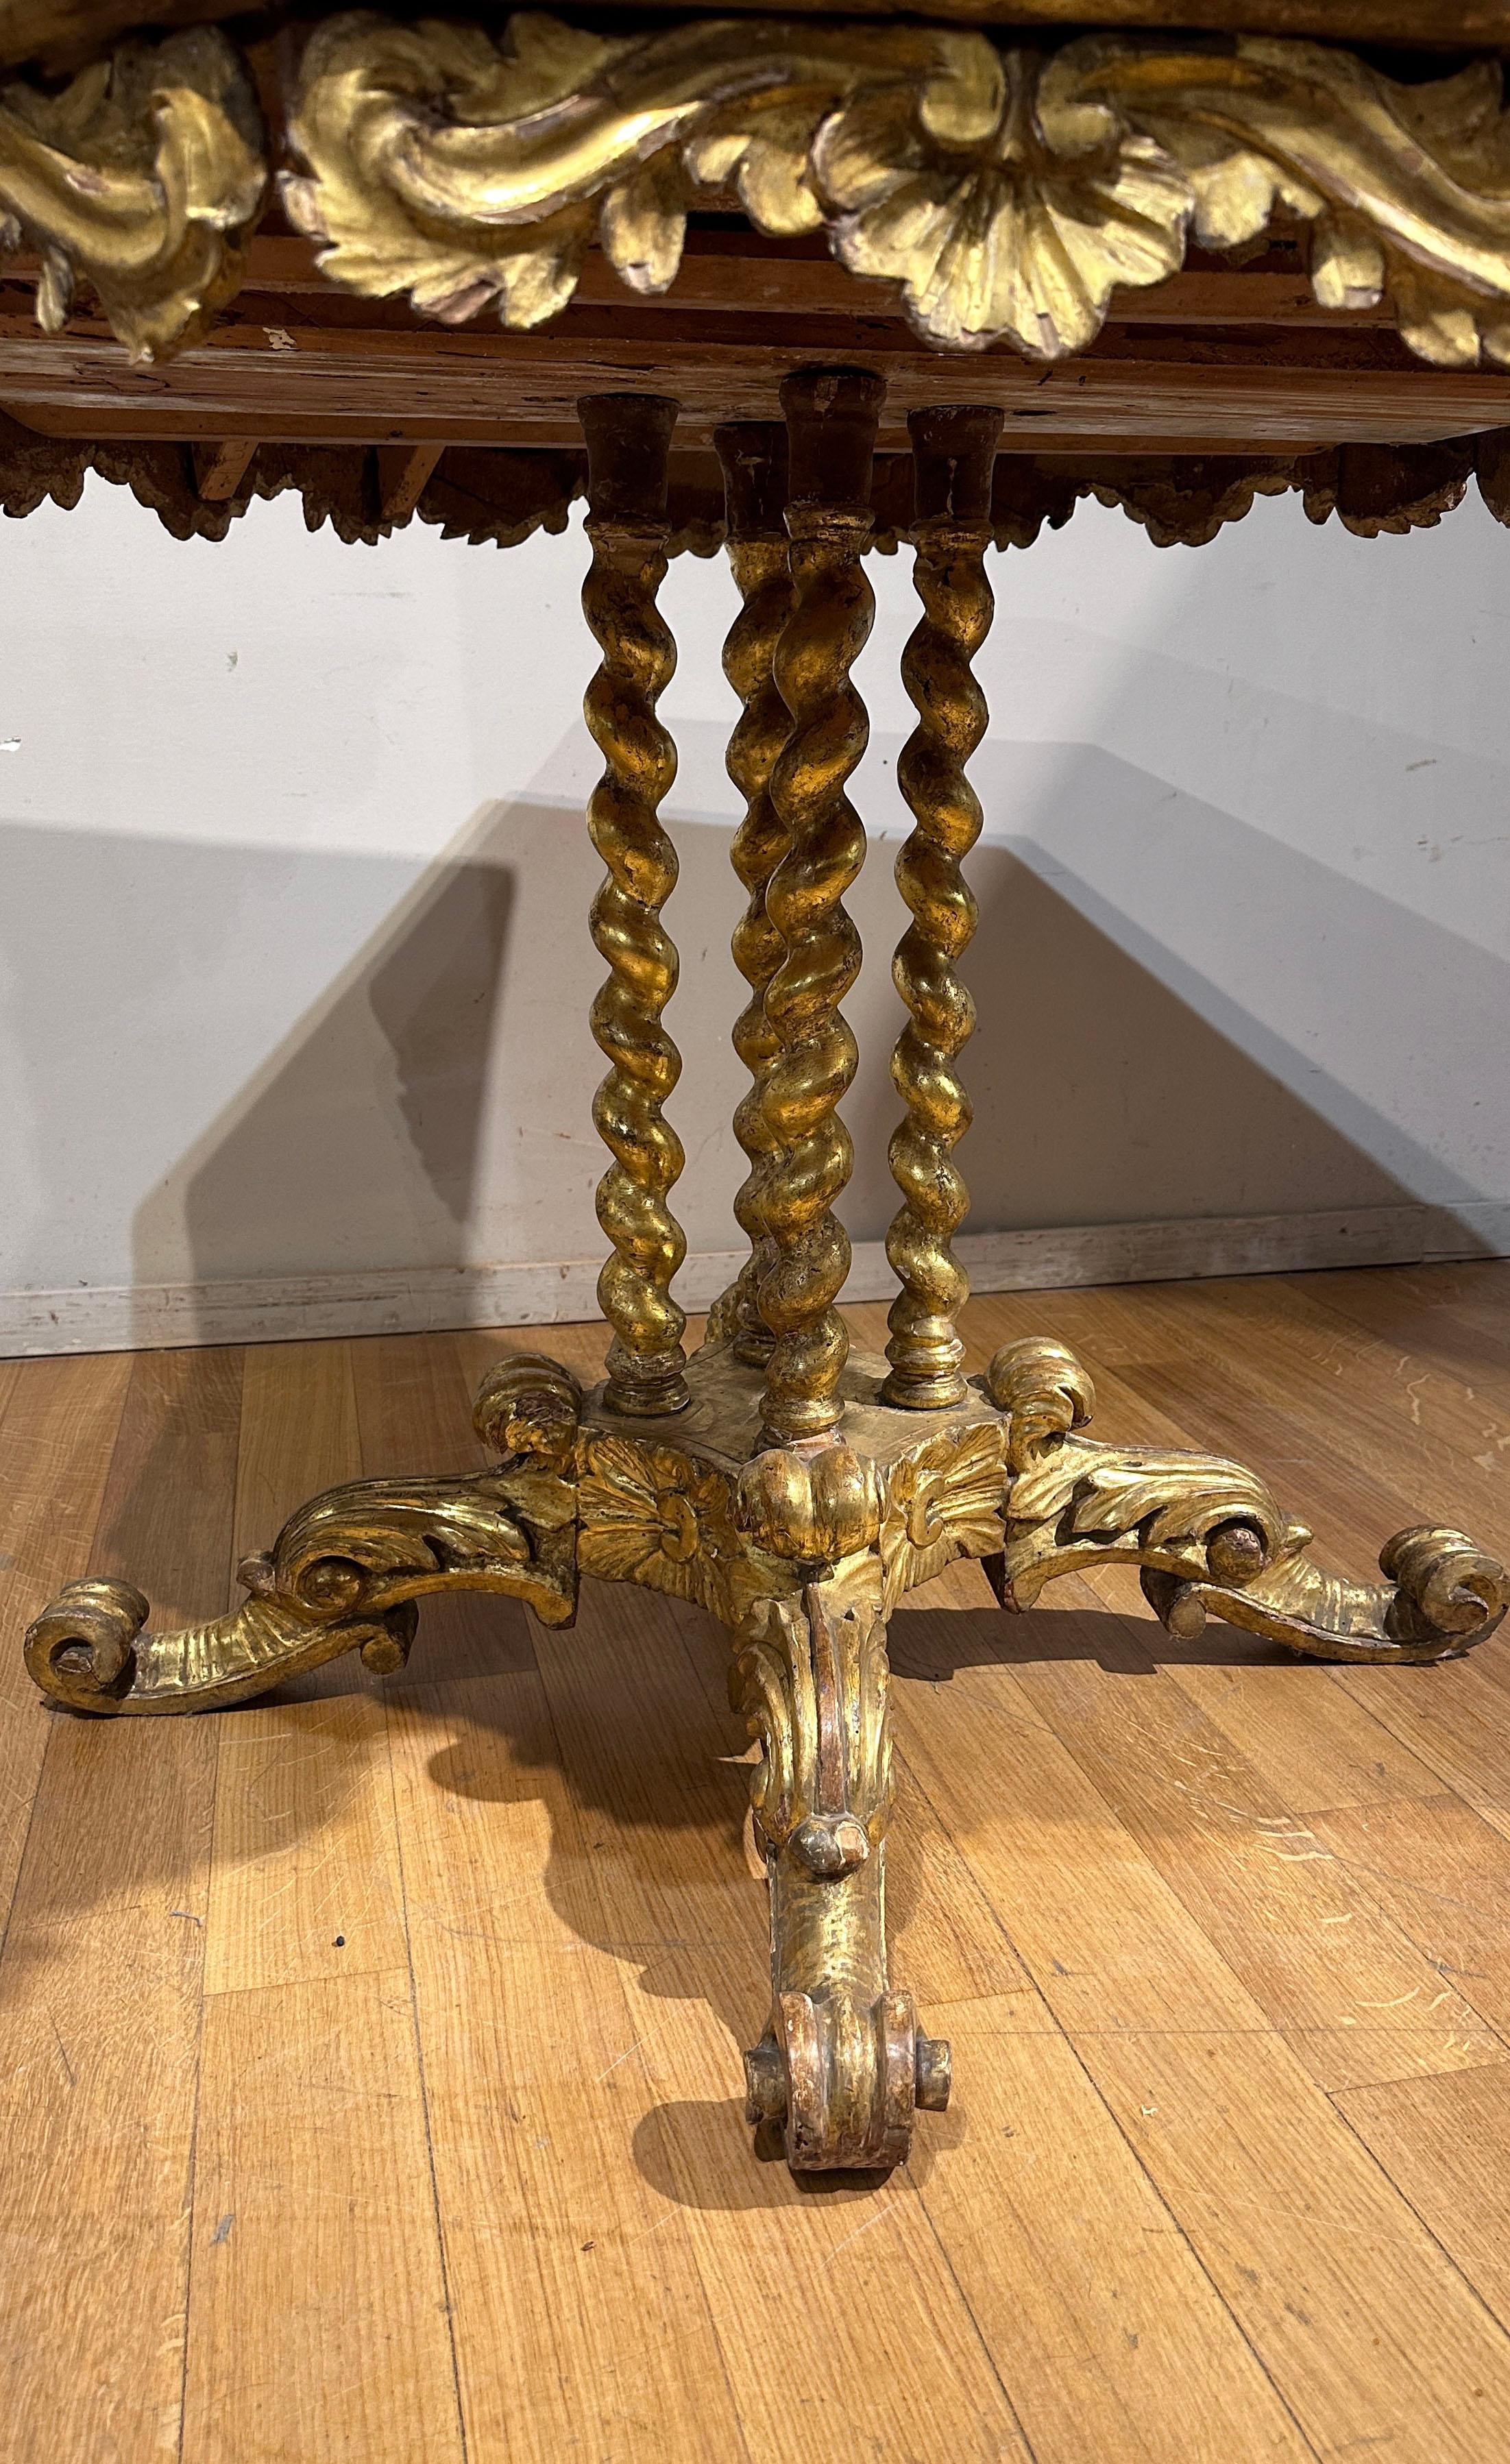 EARLY 19th CENTURY GILDED WOOD TABLE WITH SIMILAR MALACHITE FABRIC For Sale 1